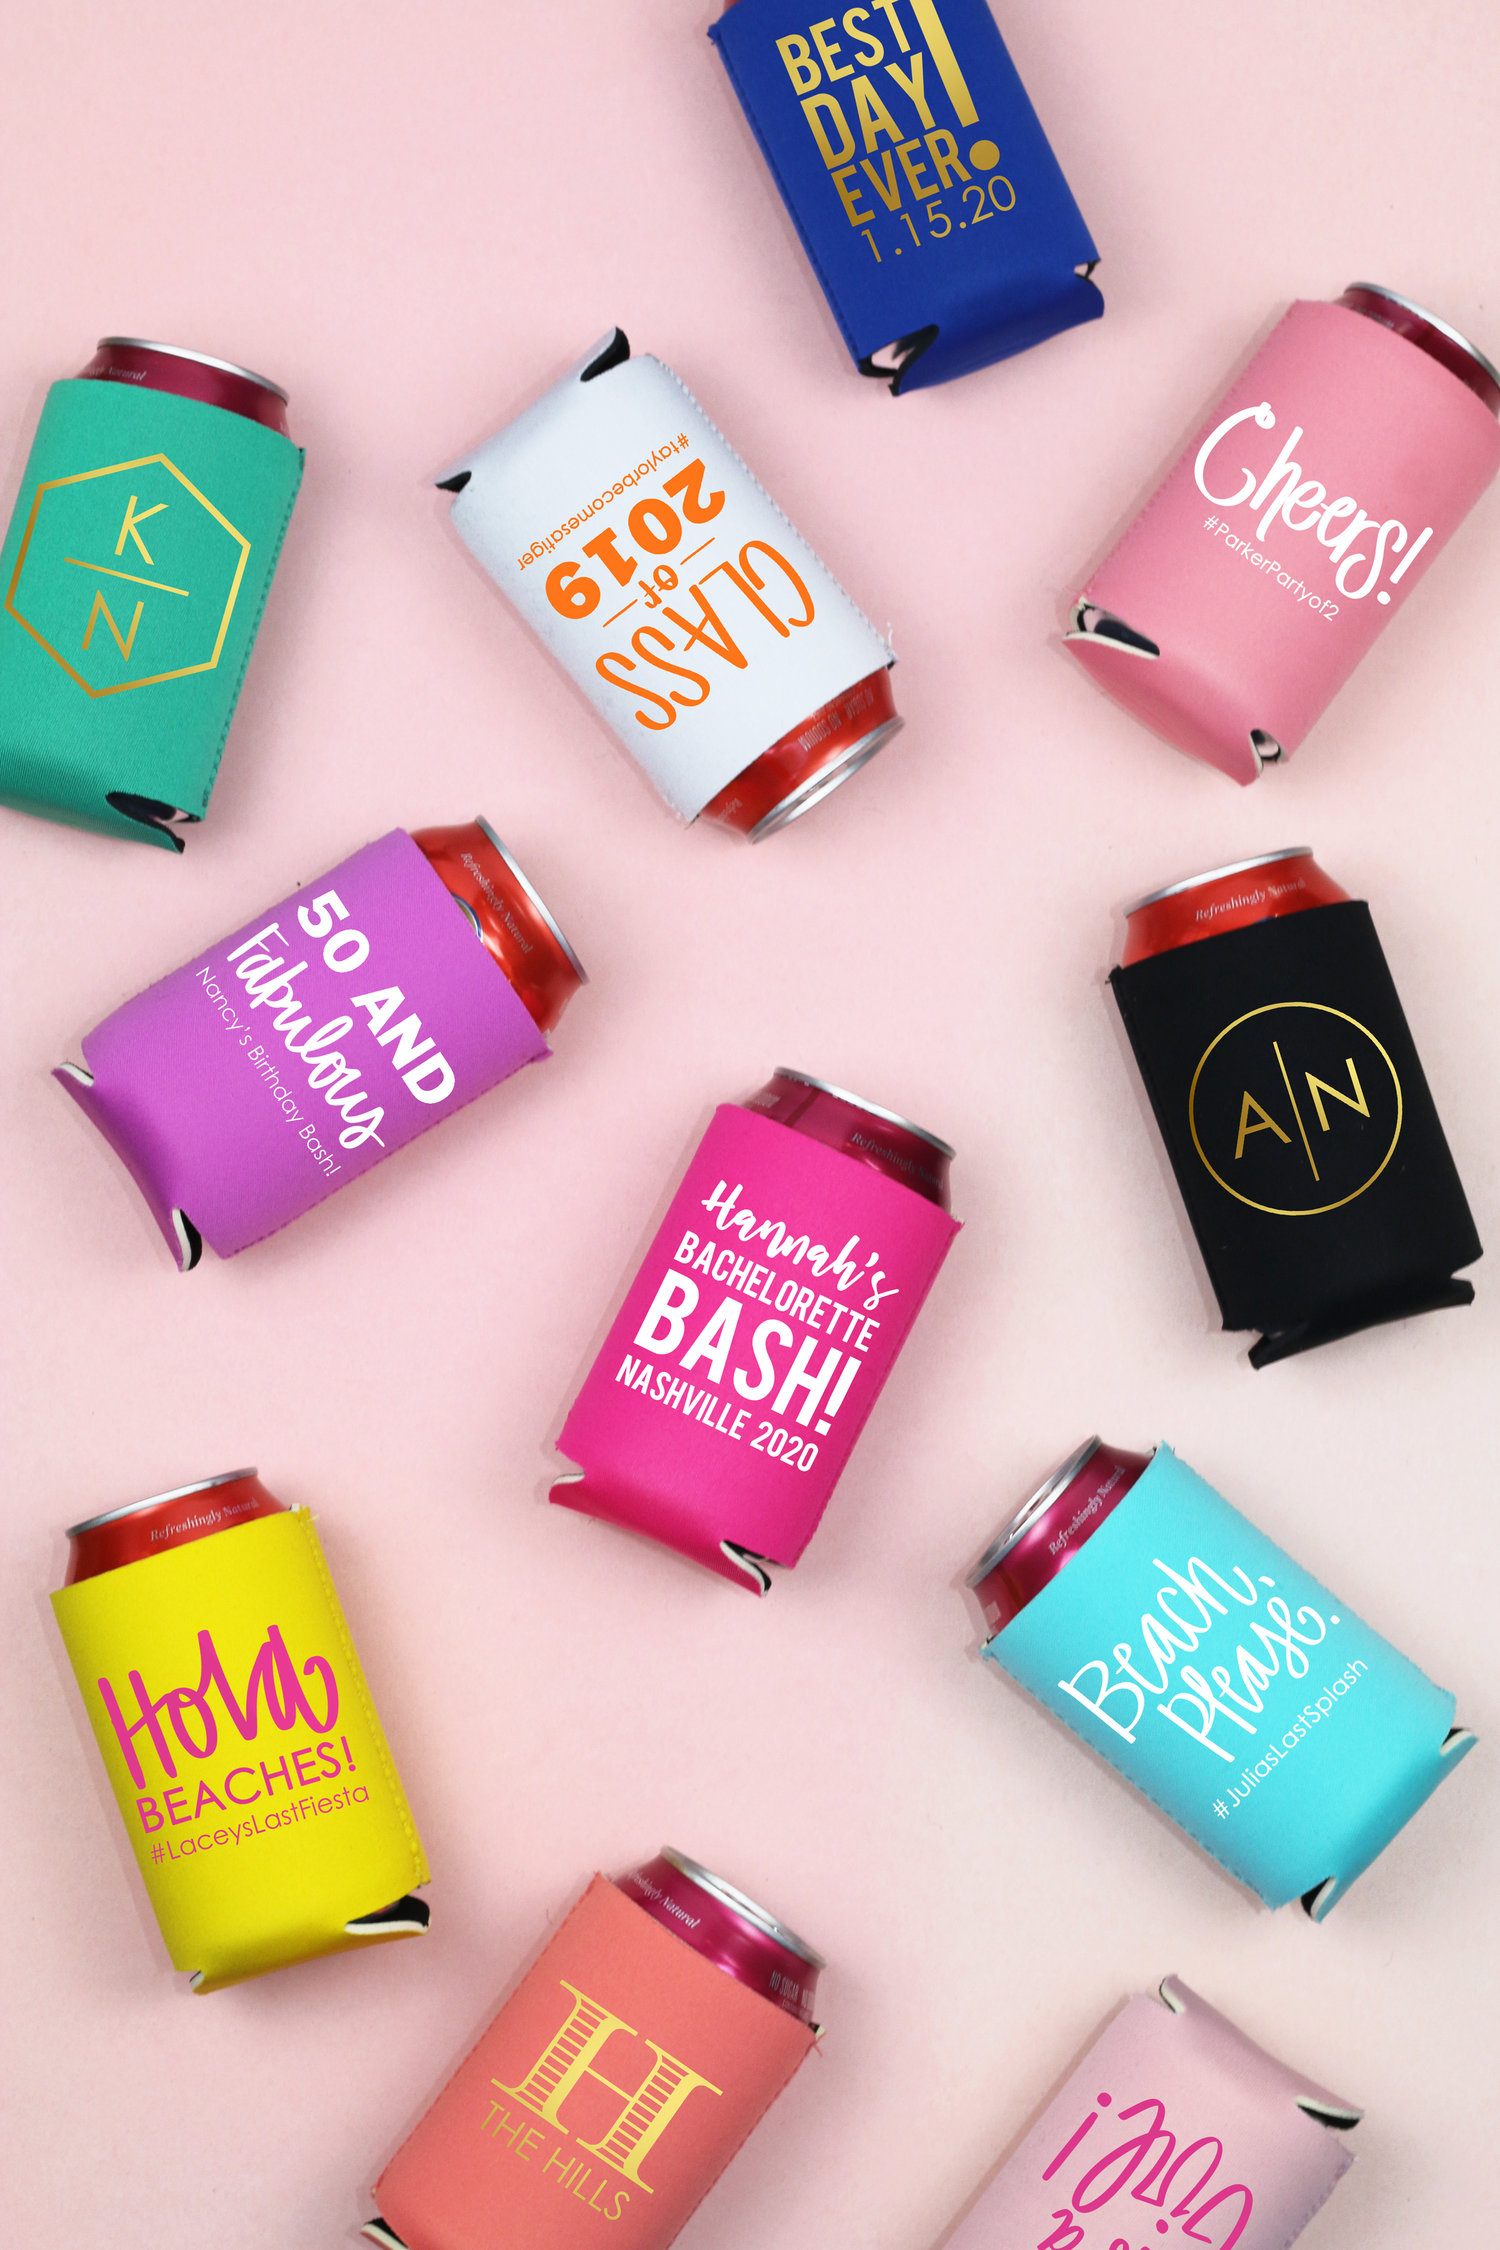 https://images.squarespace-cdn.com/content/v1/570446562fe131860c1d9db1/1551488109017-TSWE97BUS5XMNUQOS0K1/personalized-koozies-flat-lay.jpg?format=1500w